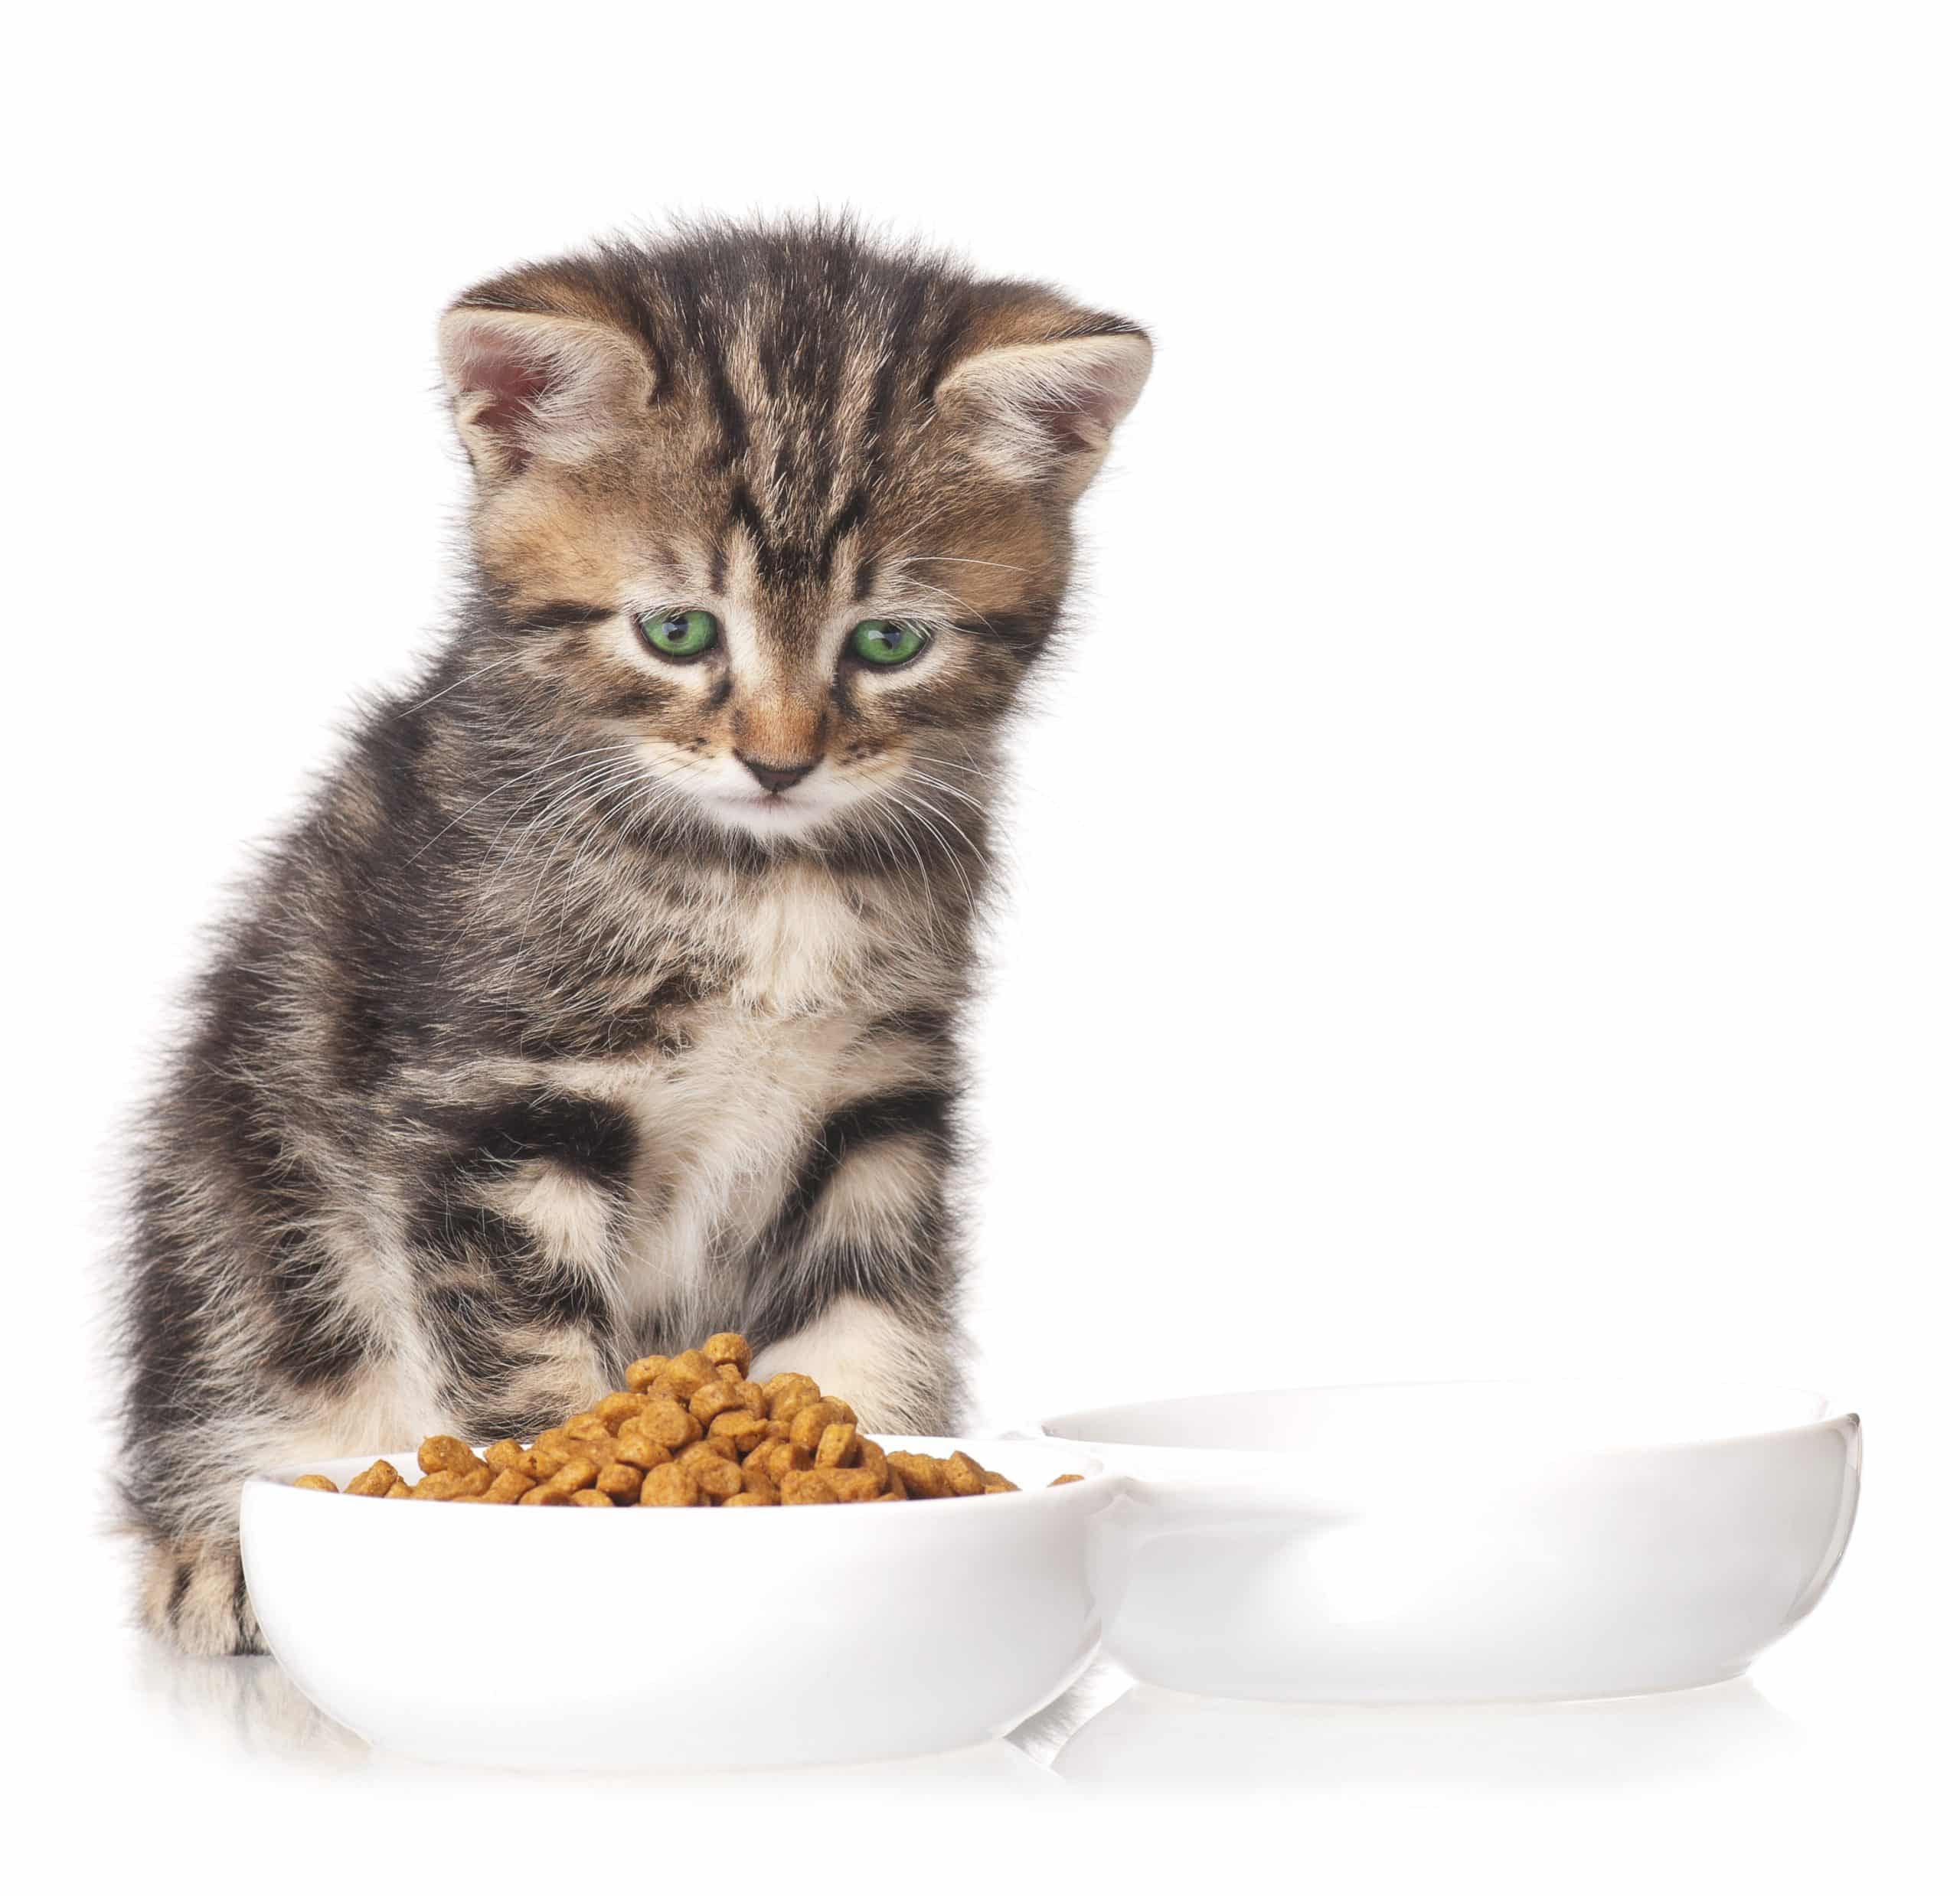 At What Age Can Kittens Eat Regular Cat Food